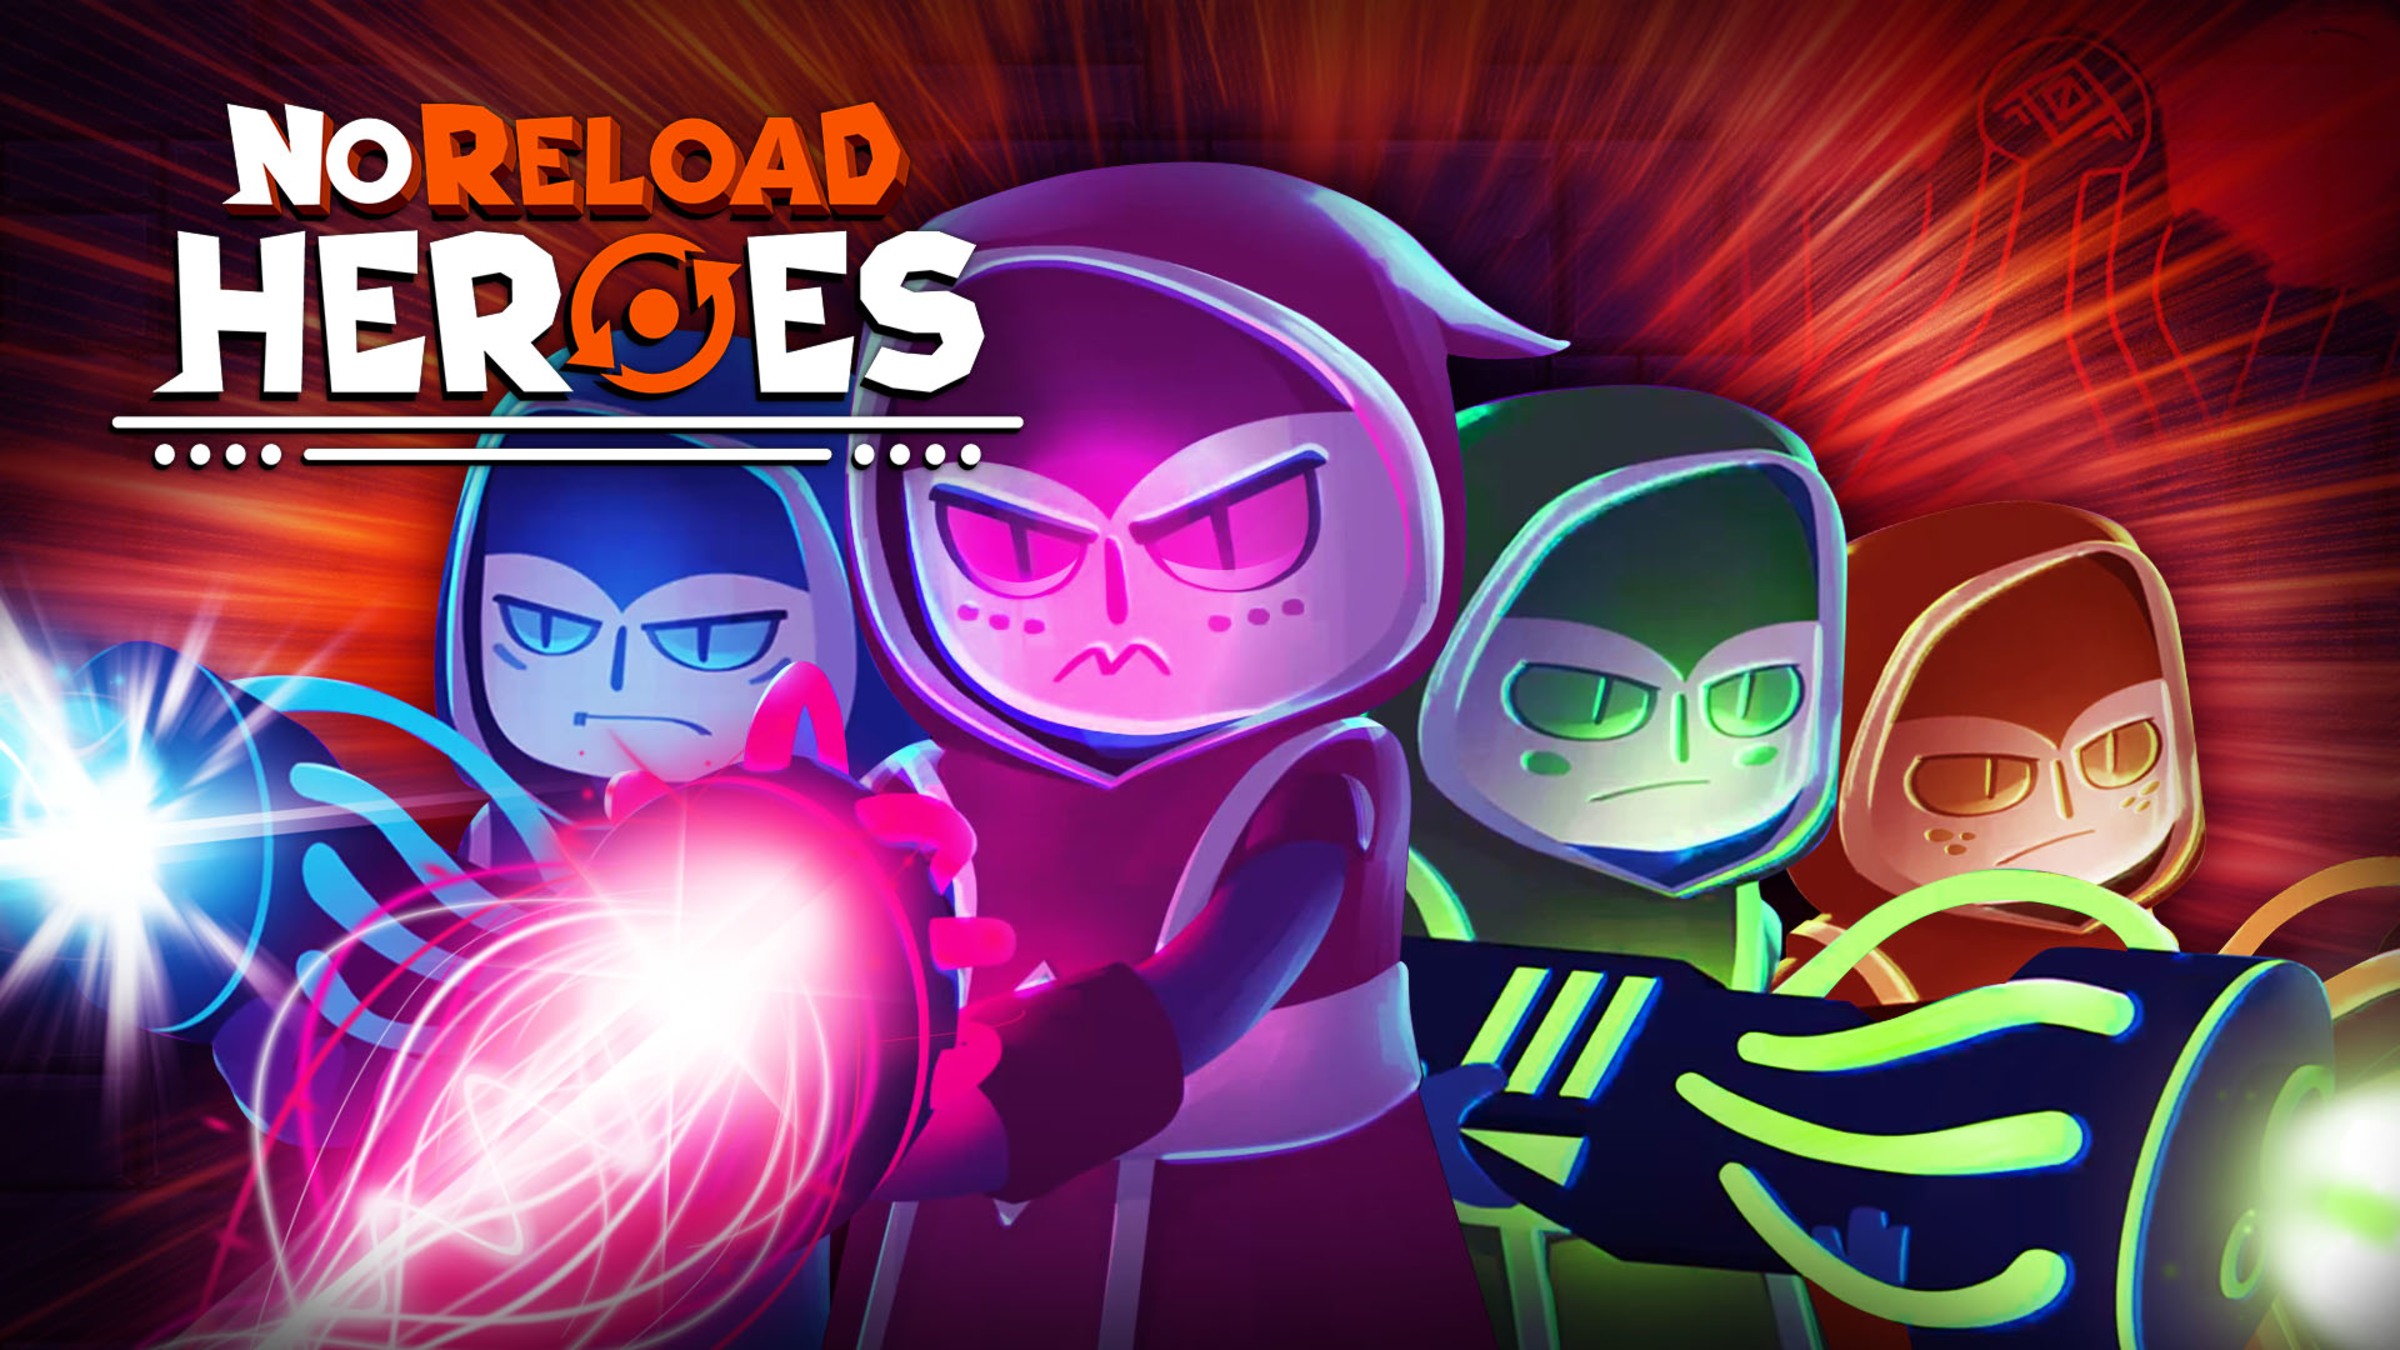 NoReload Heroes for Nintendo Switch